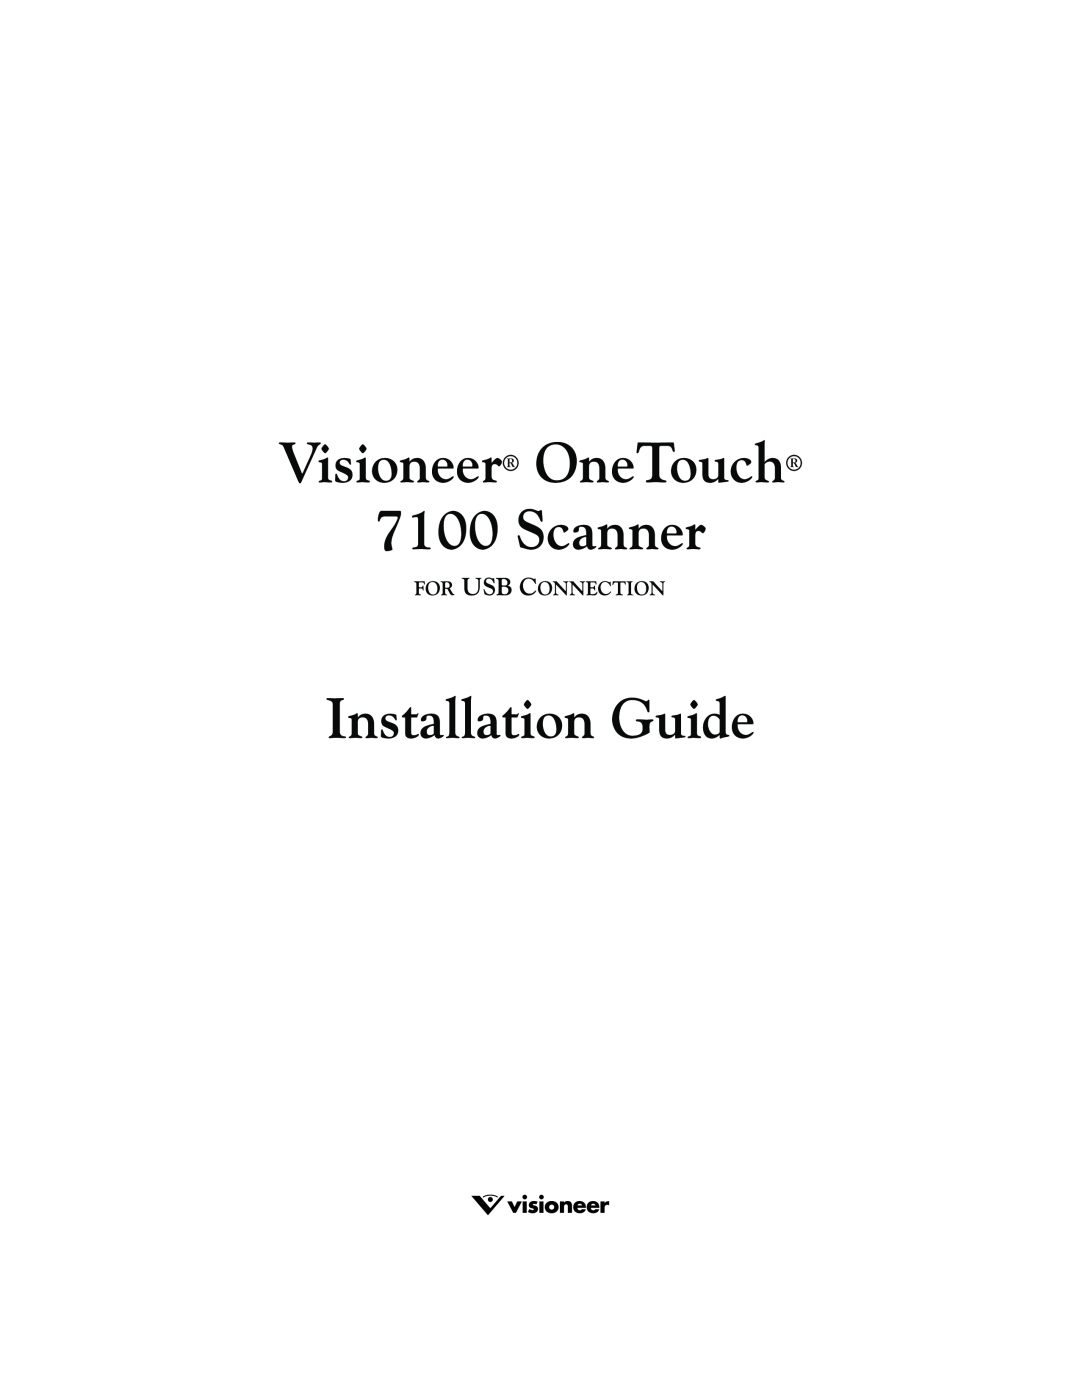 Visioneer manual Visioneer OneTouch 7100 Scanner, Installation Guide, For Usb Connection 